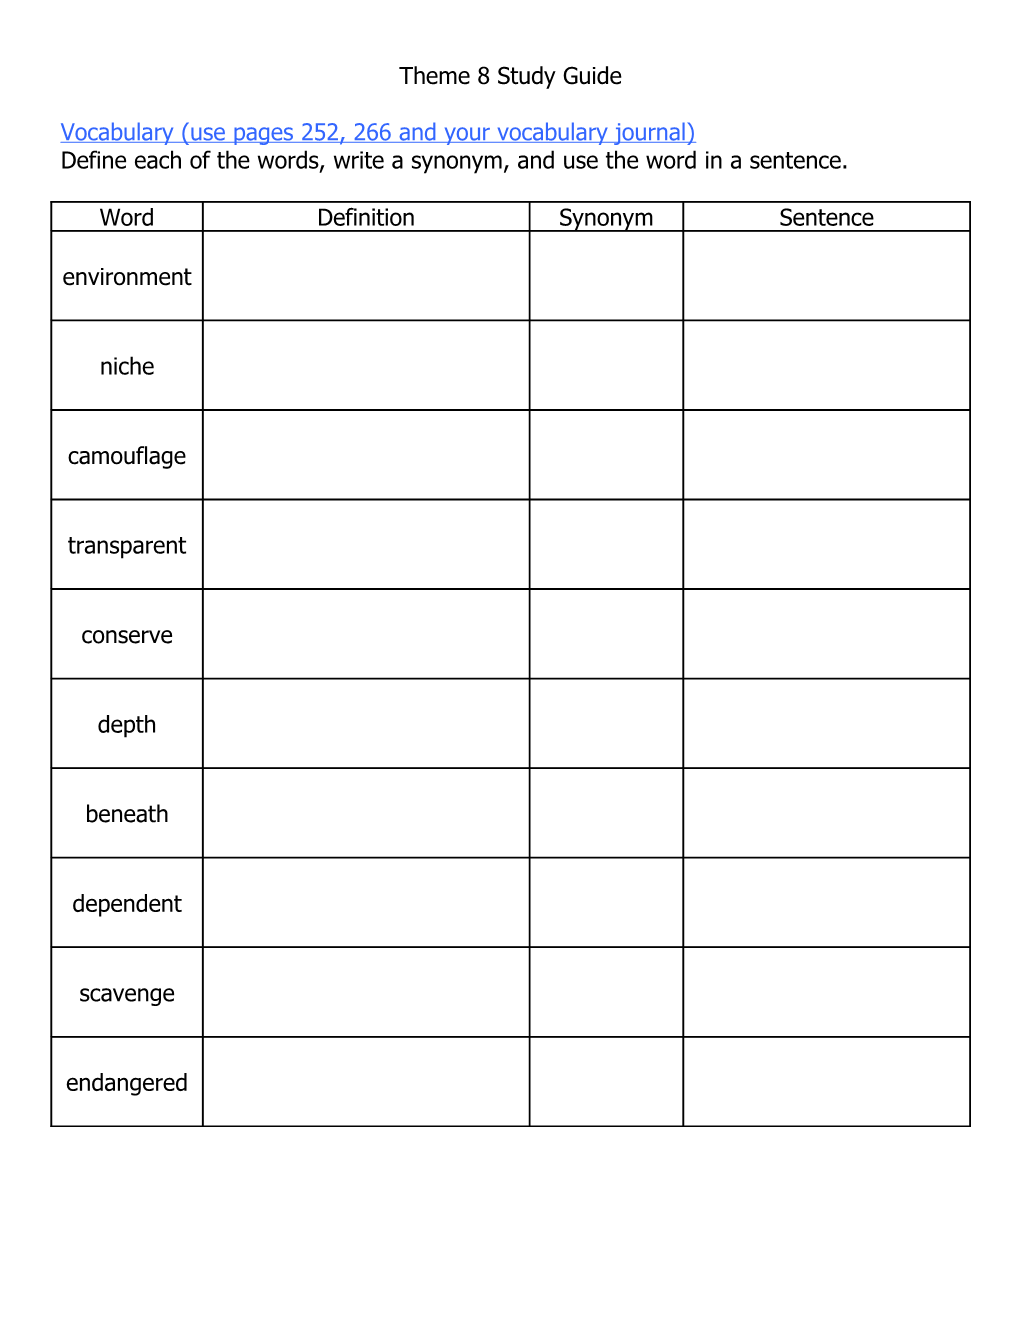 Vocabulary (Use Pages 252, 266 and Your Vocabulary Journal)